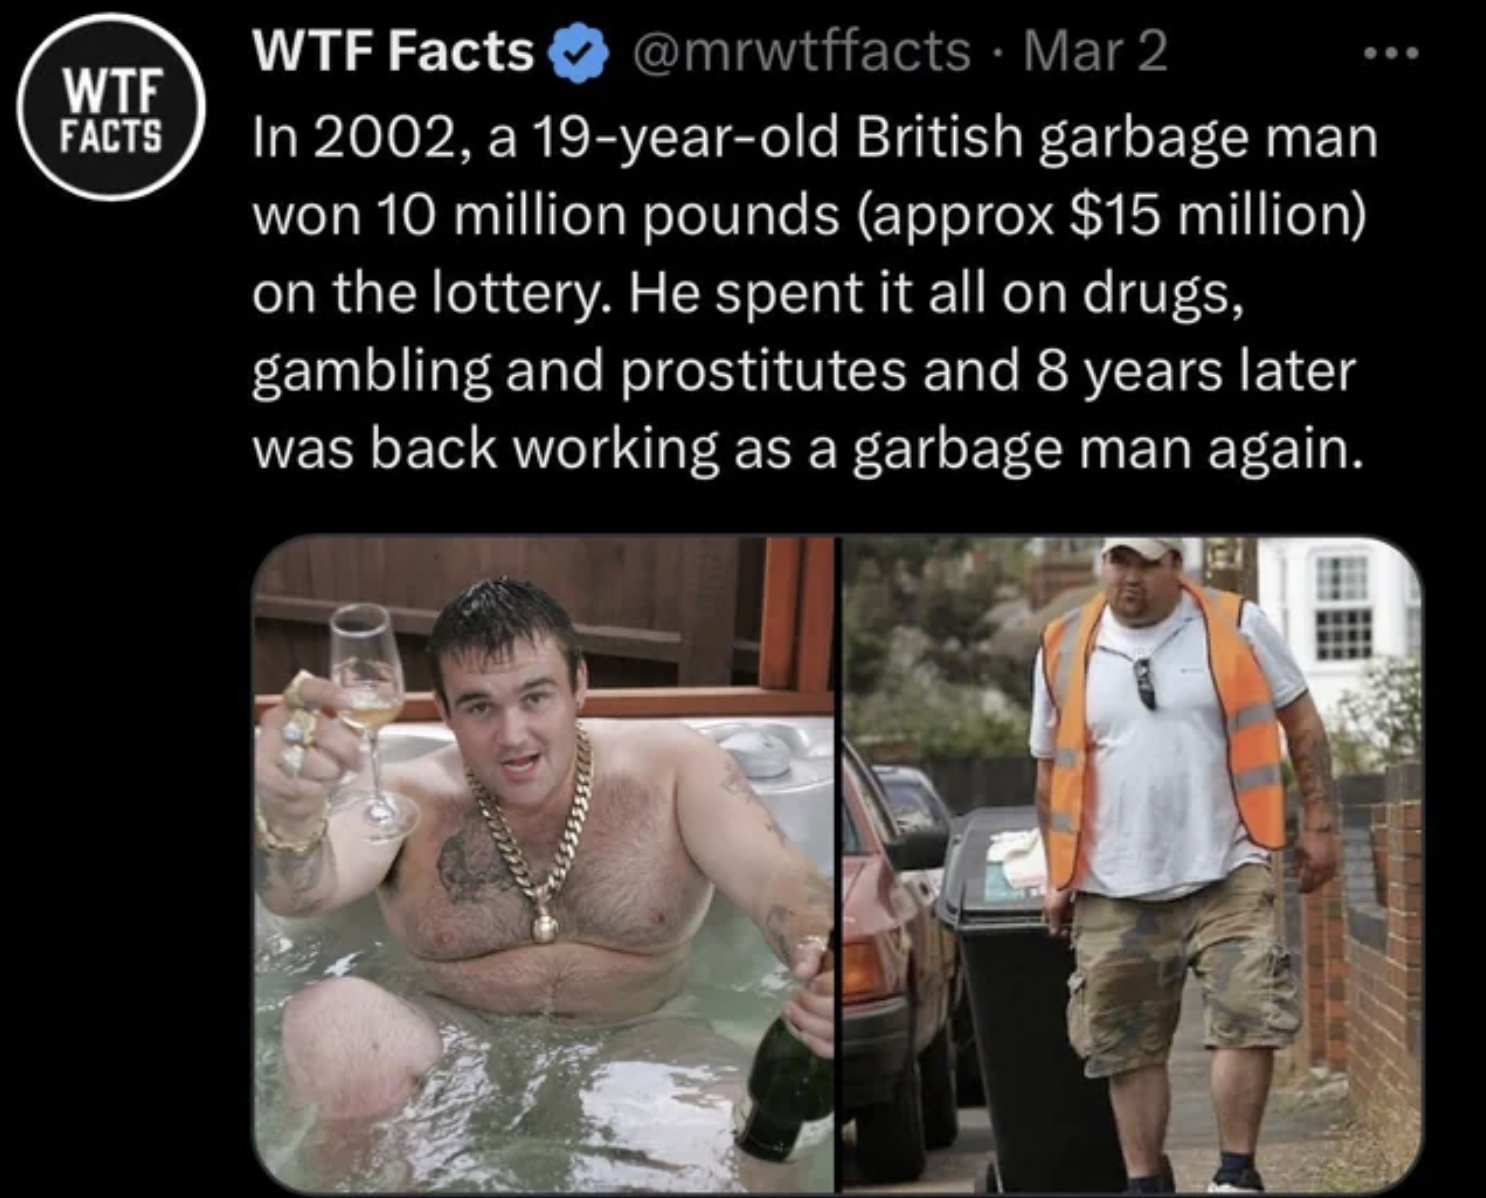 funny facepalms - photo caption -9yearold British garbage man won 10 million pounds approx $15 million on the lottery. He spent it all on drugs, gambling and prostitutes and 8 years later was back working as a garbage man again.